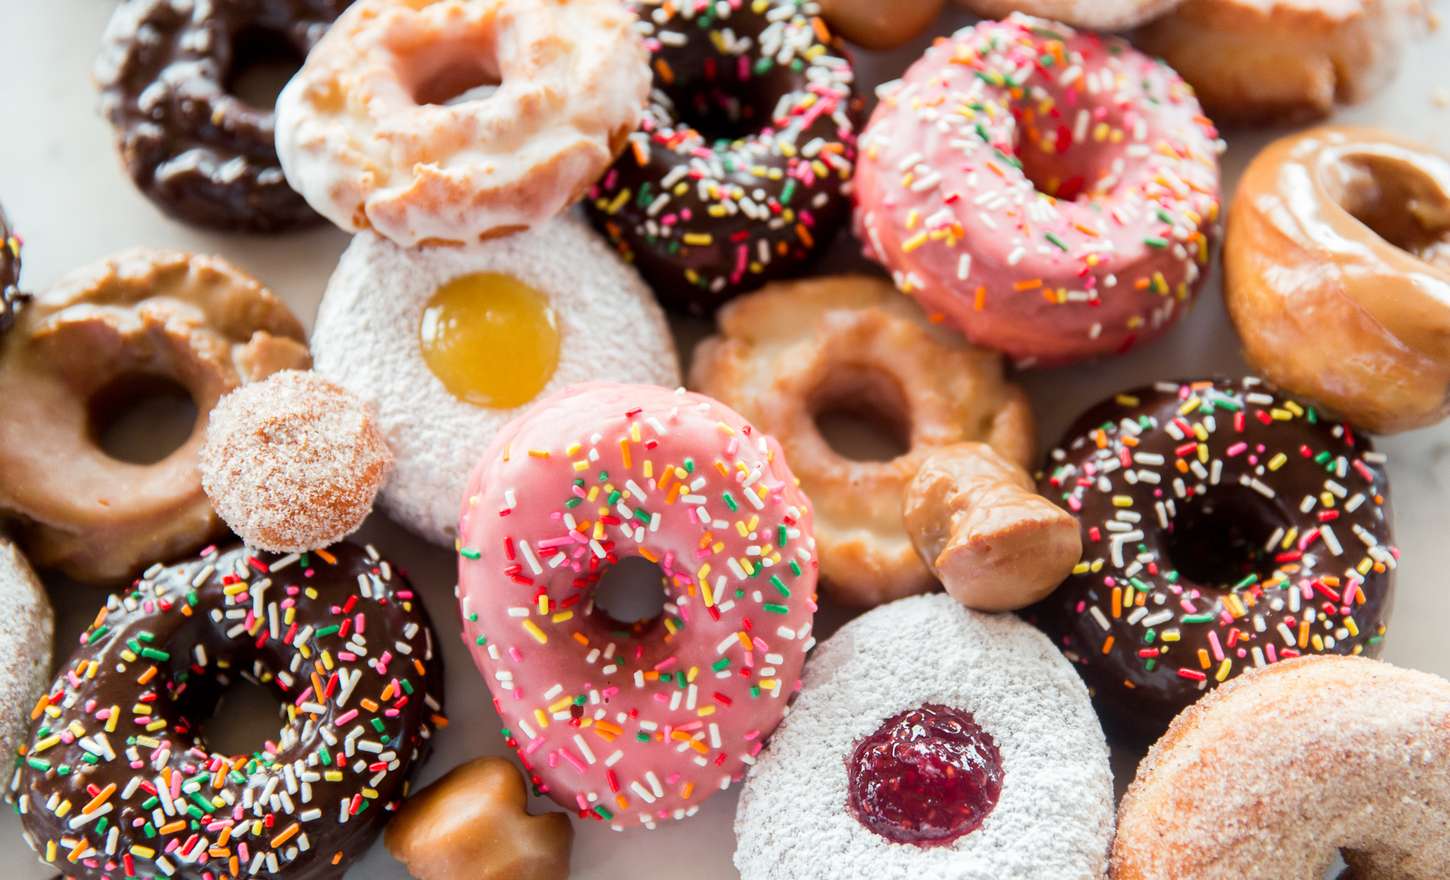 Can We Guess the Food You Hate Based on the Food You Love? donuts